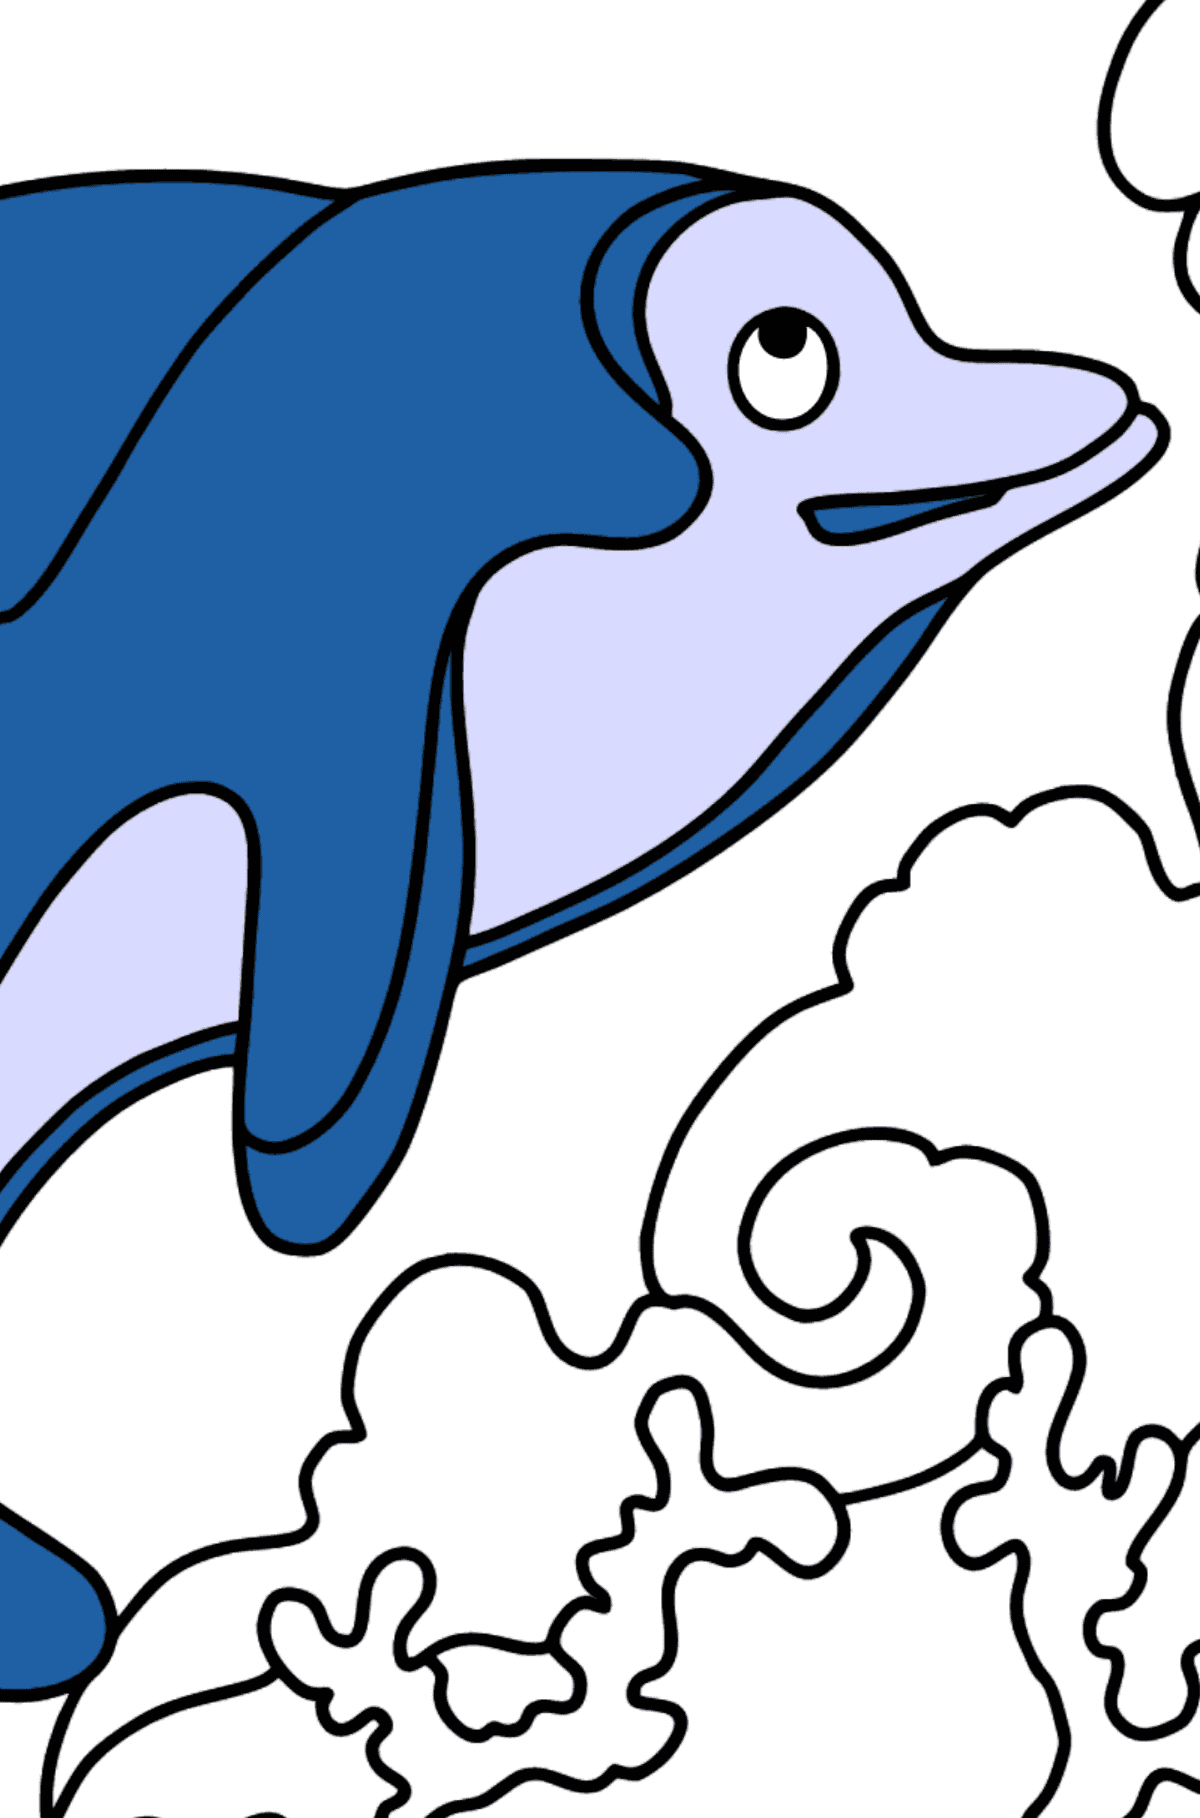 Coloring Page - A Dolphin, an Agile and Fast Predator - Coloring by Letters for Kids